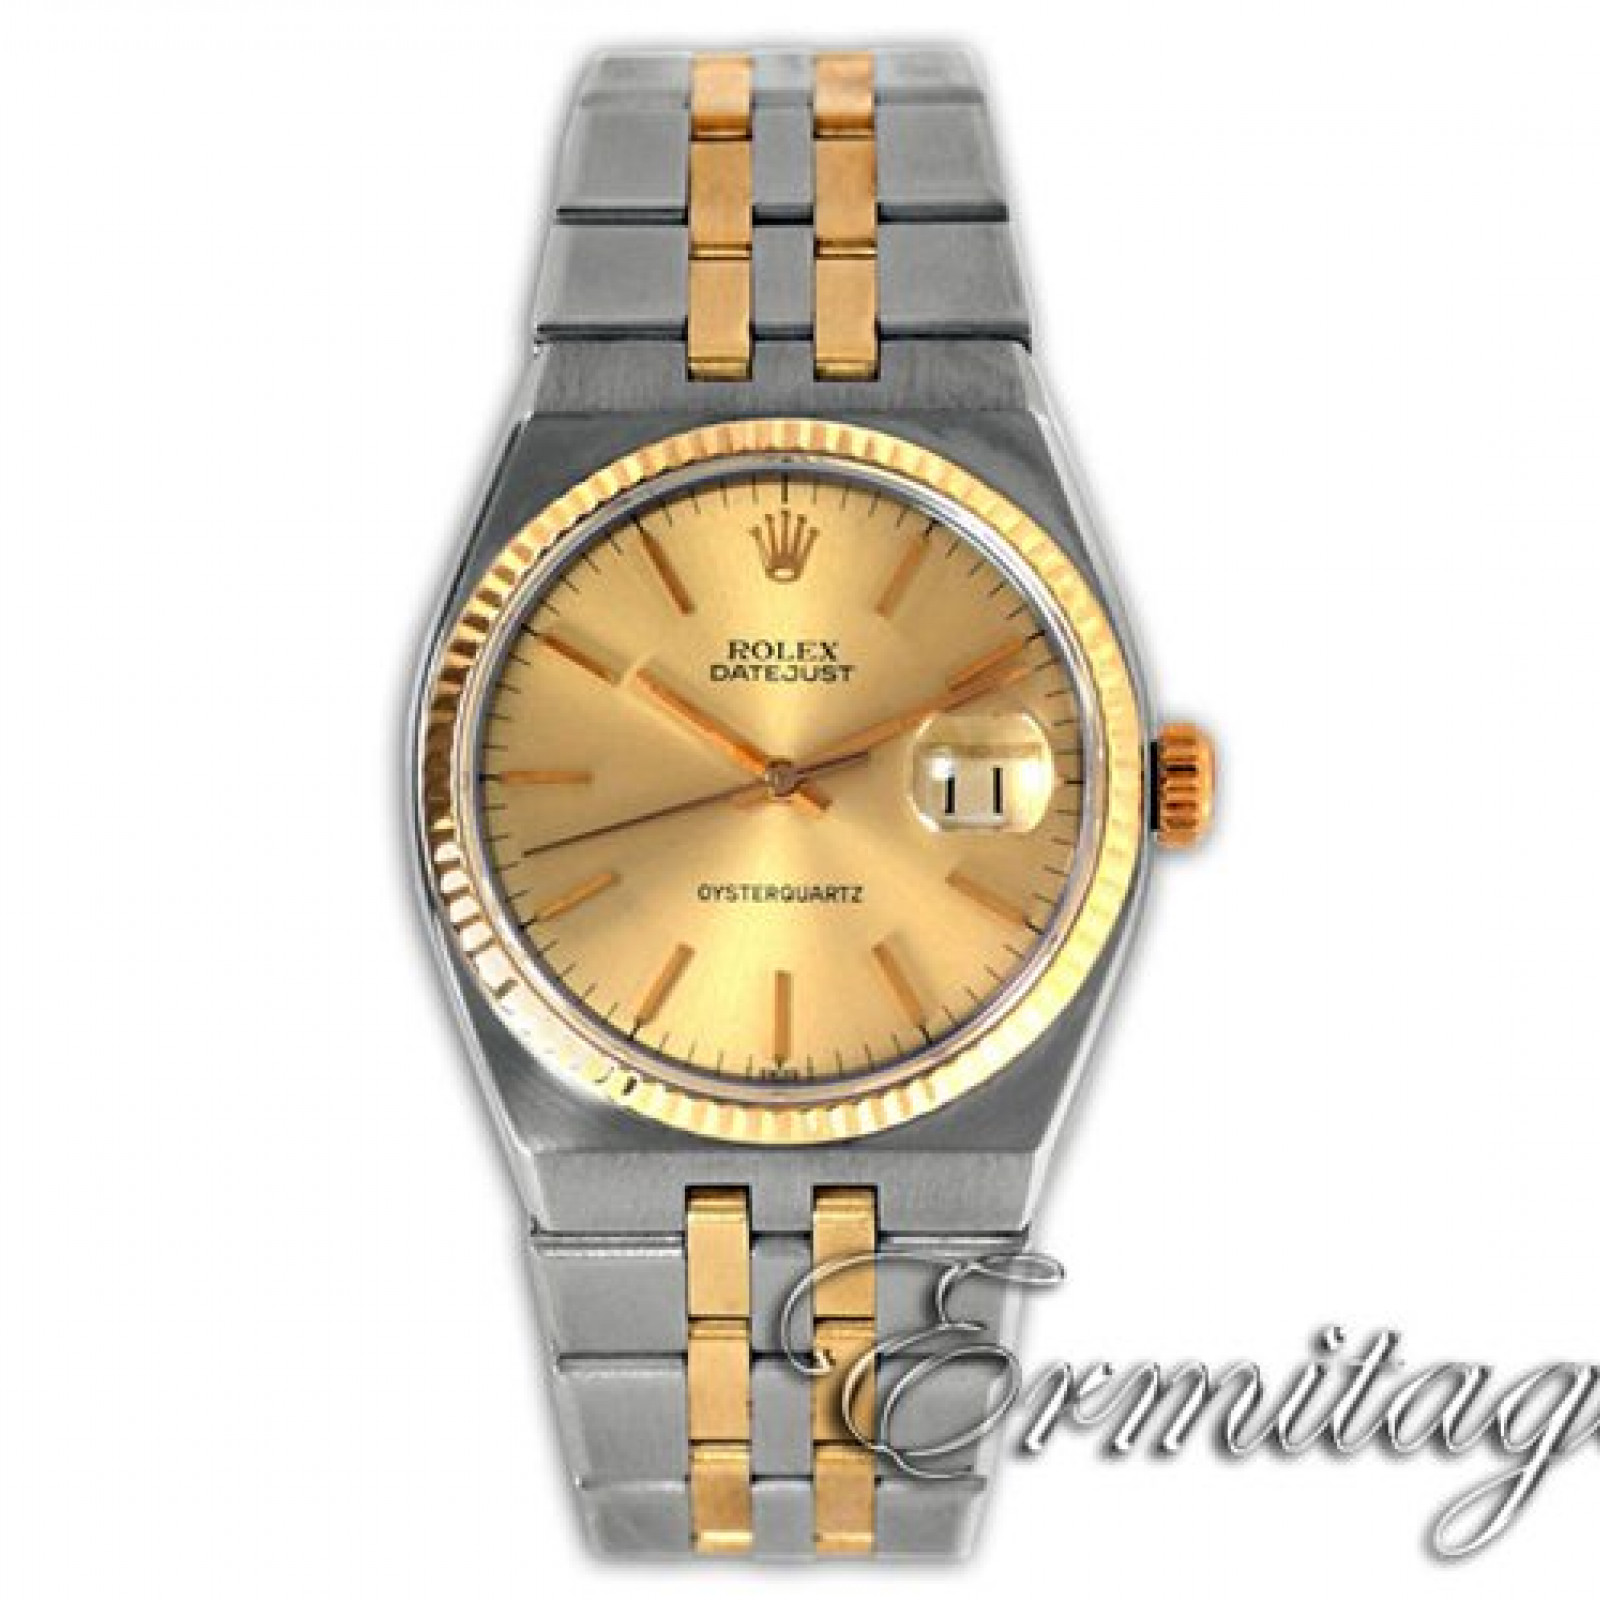 Pre-Owned Rolex Datejust Oysterquartz 17013 Gold & Steel